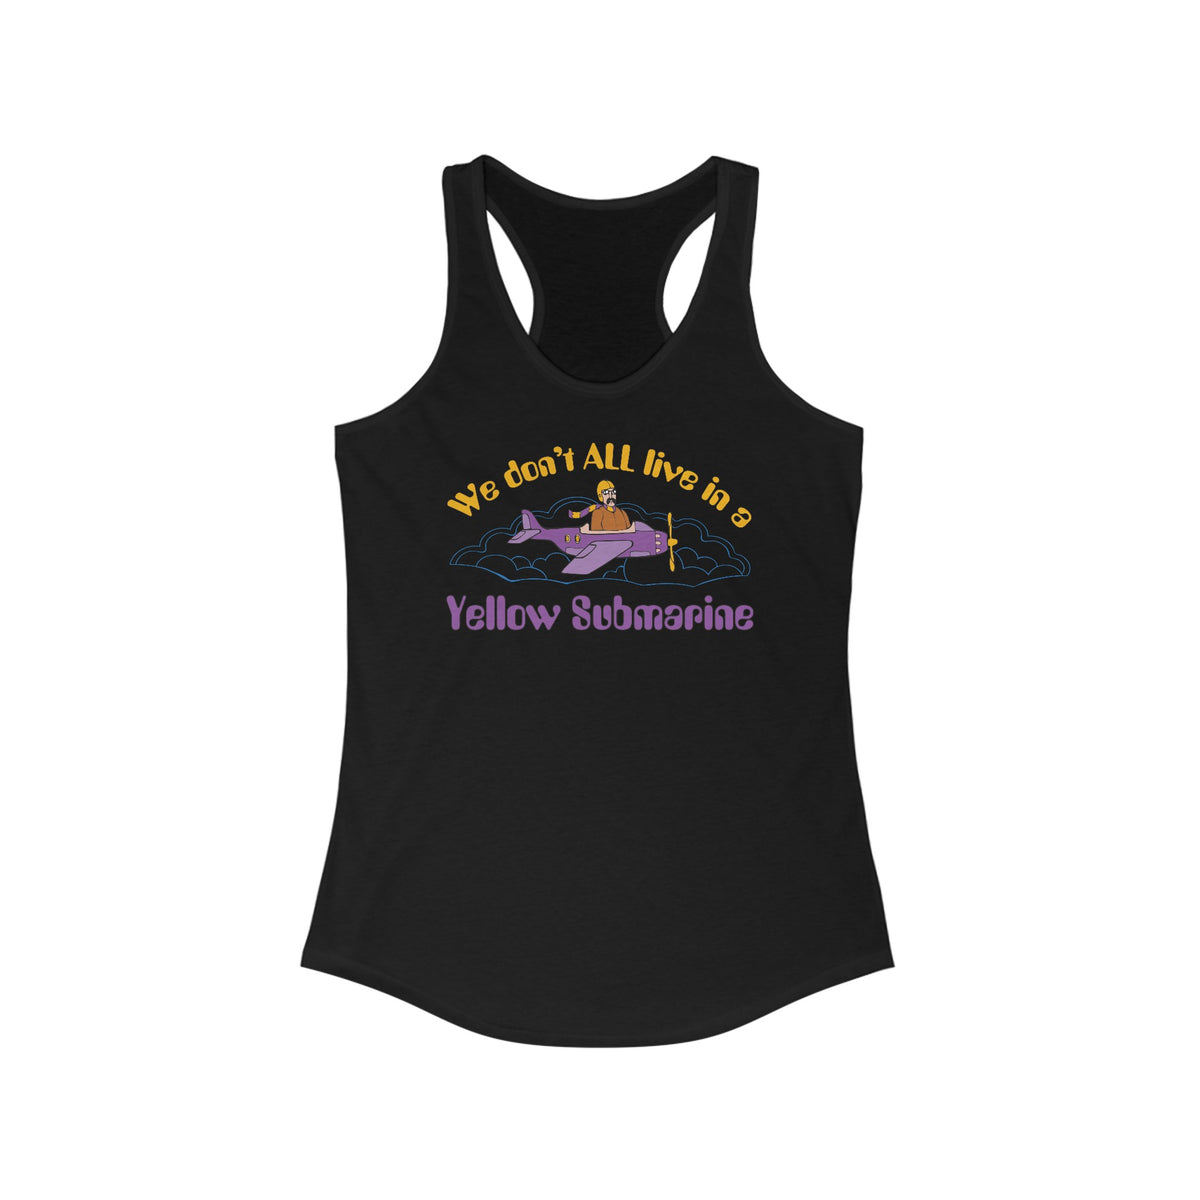 We Don't All Live In A Yellow Submarine - Women’s Racerback Tank